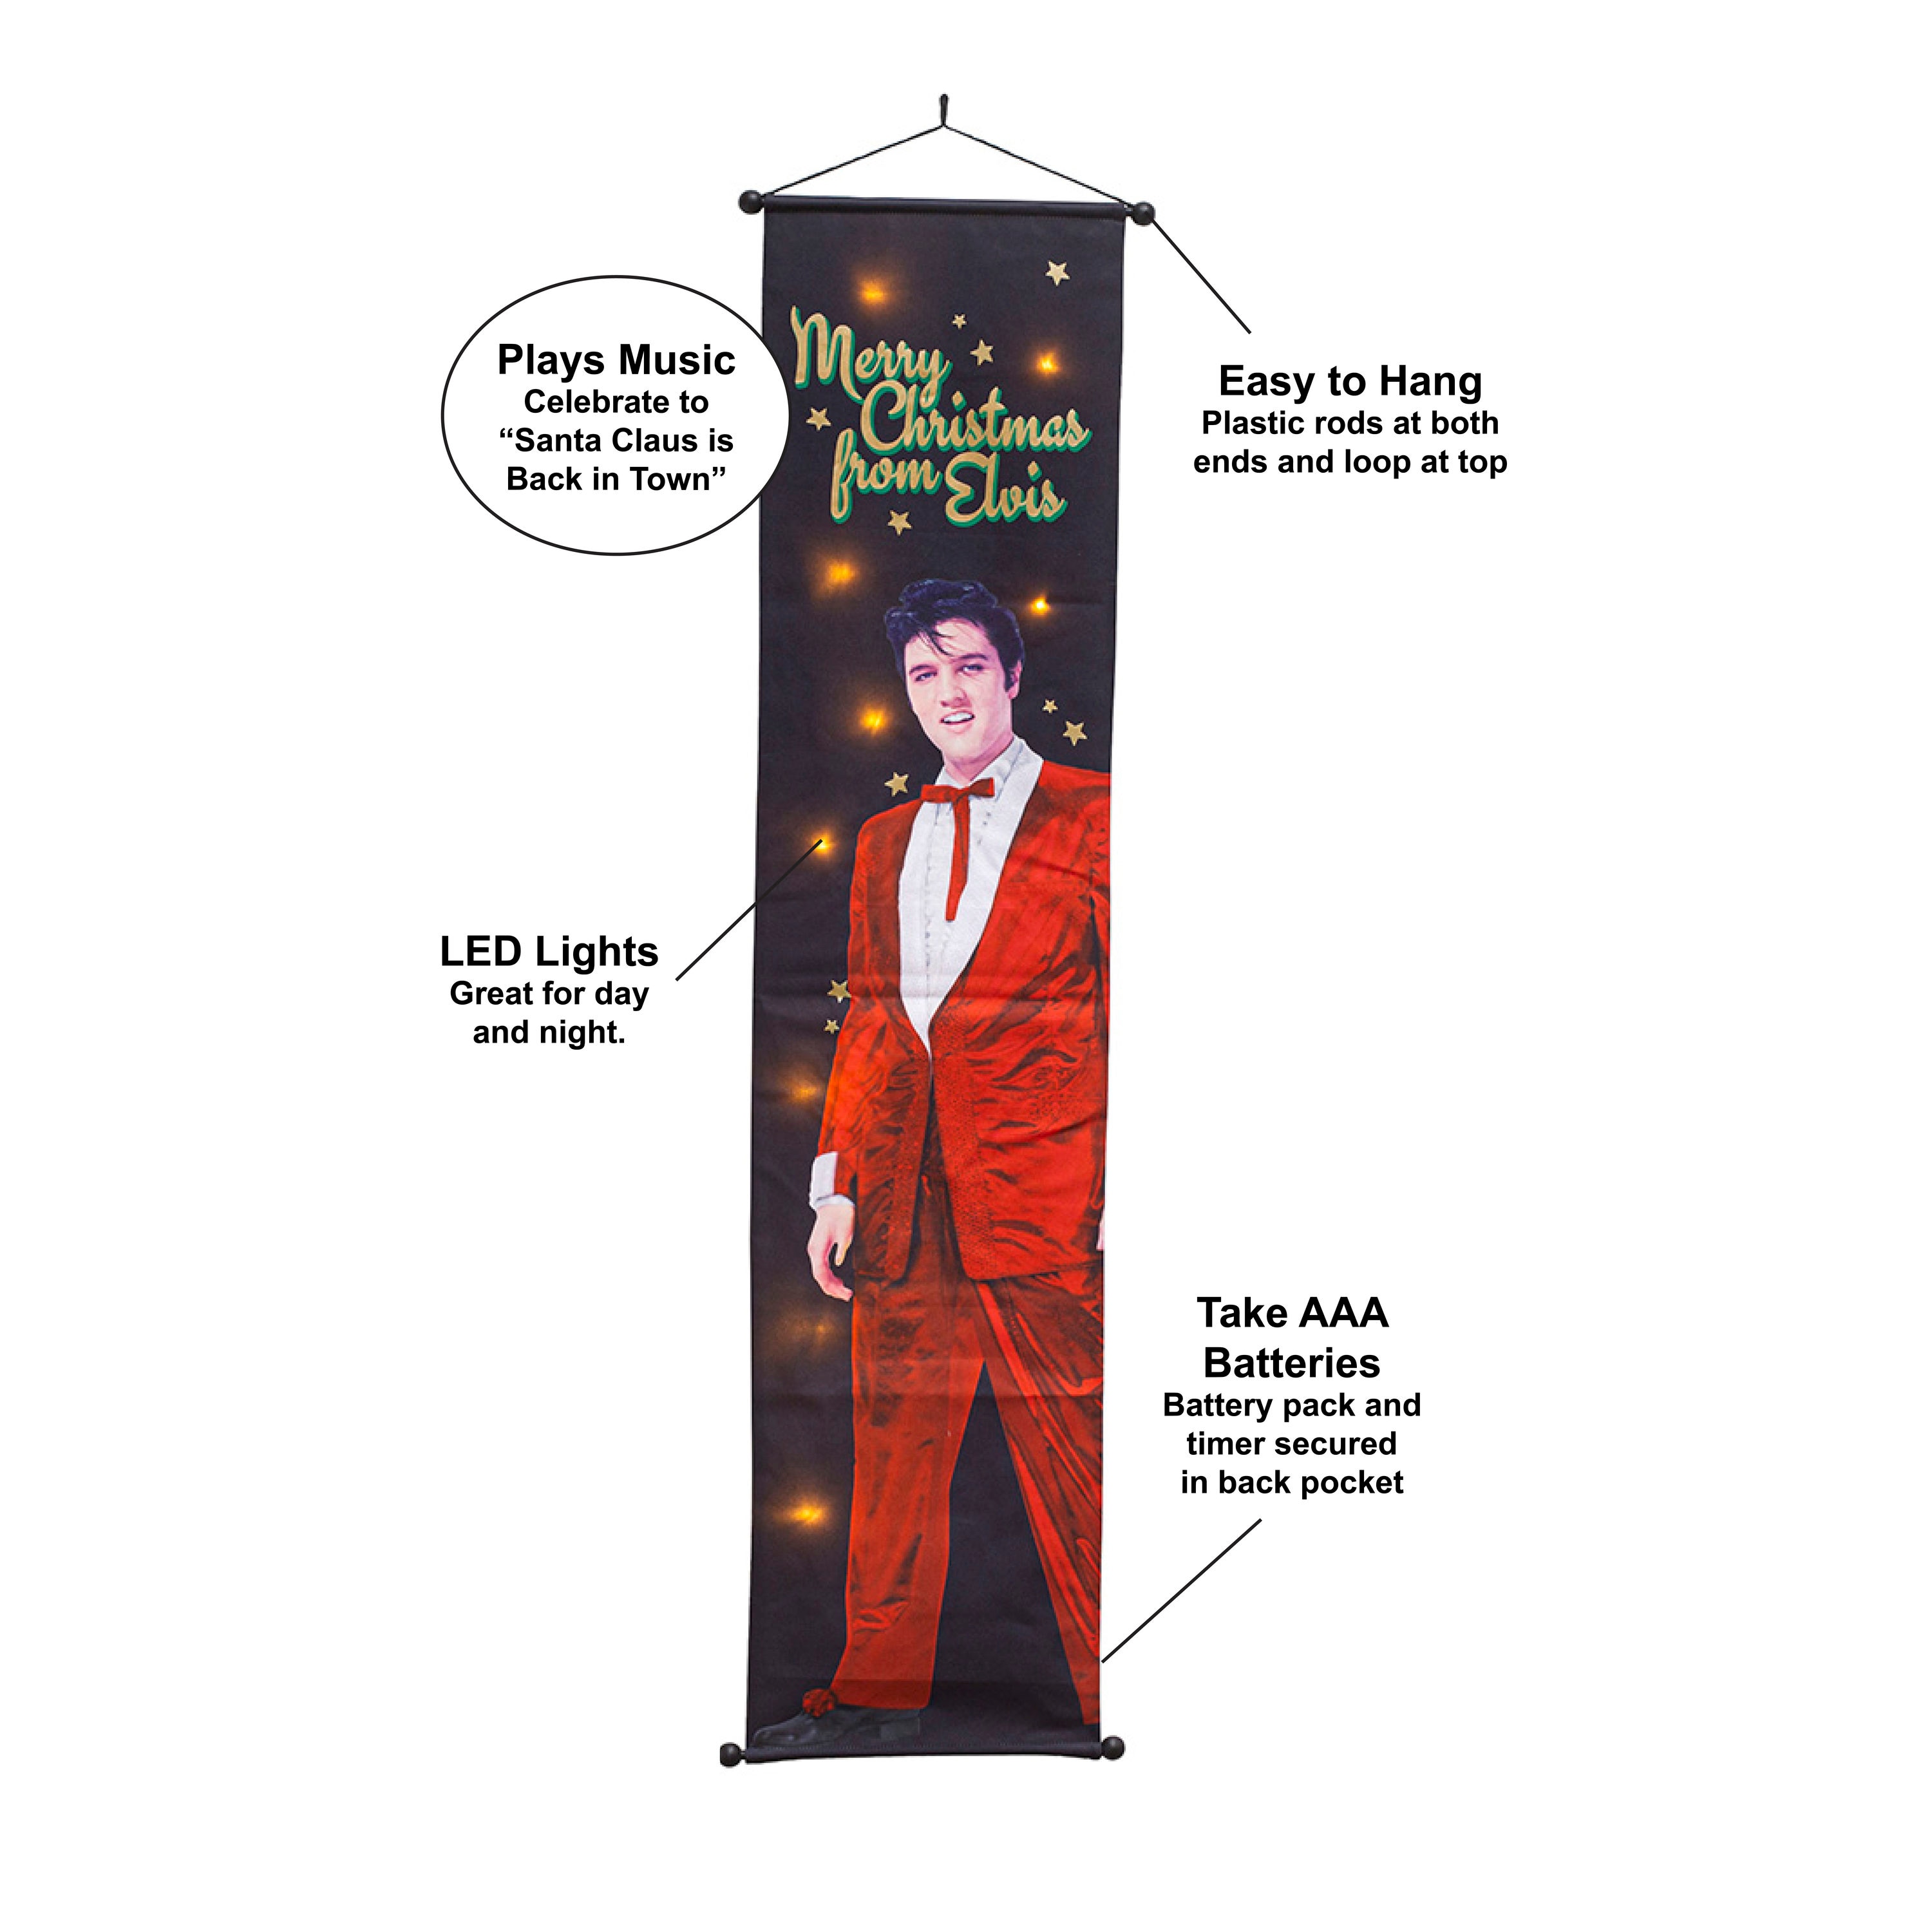 Elvis Presley Polyester Bottle Carrier Featuring An Elvis-Themed